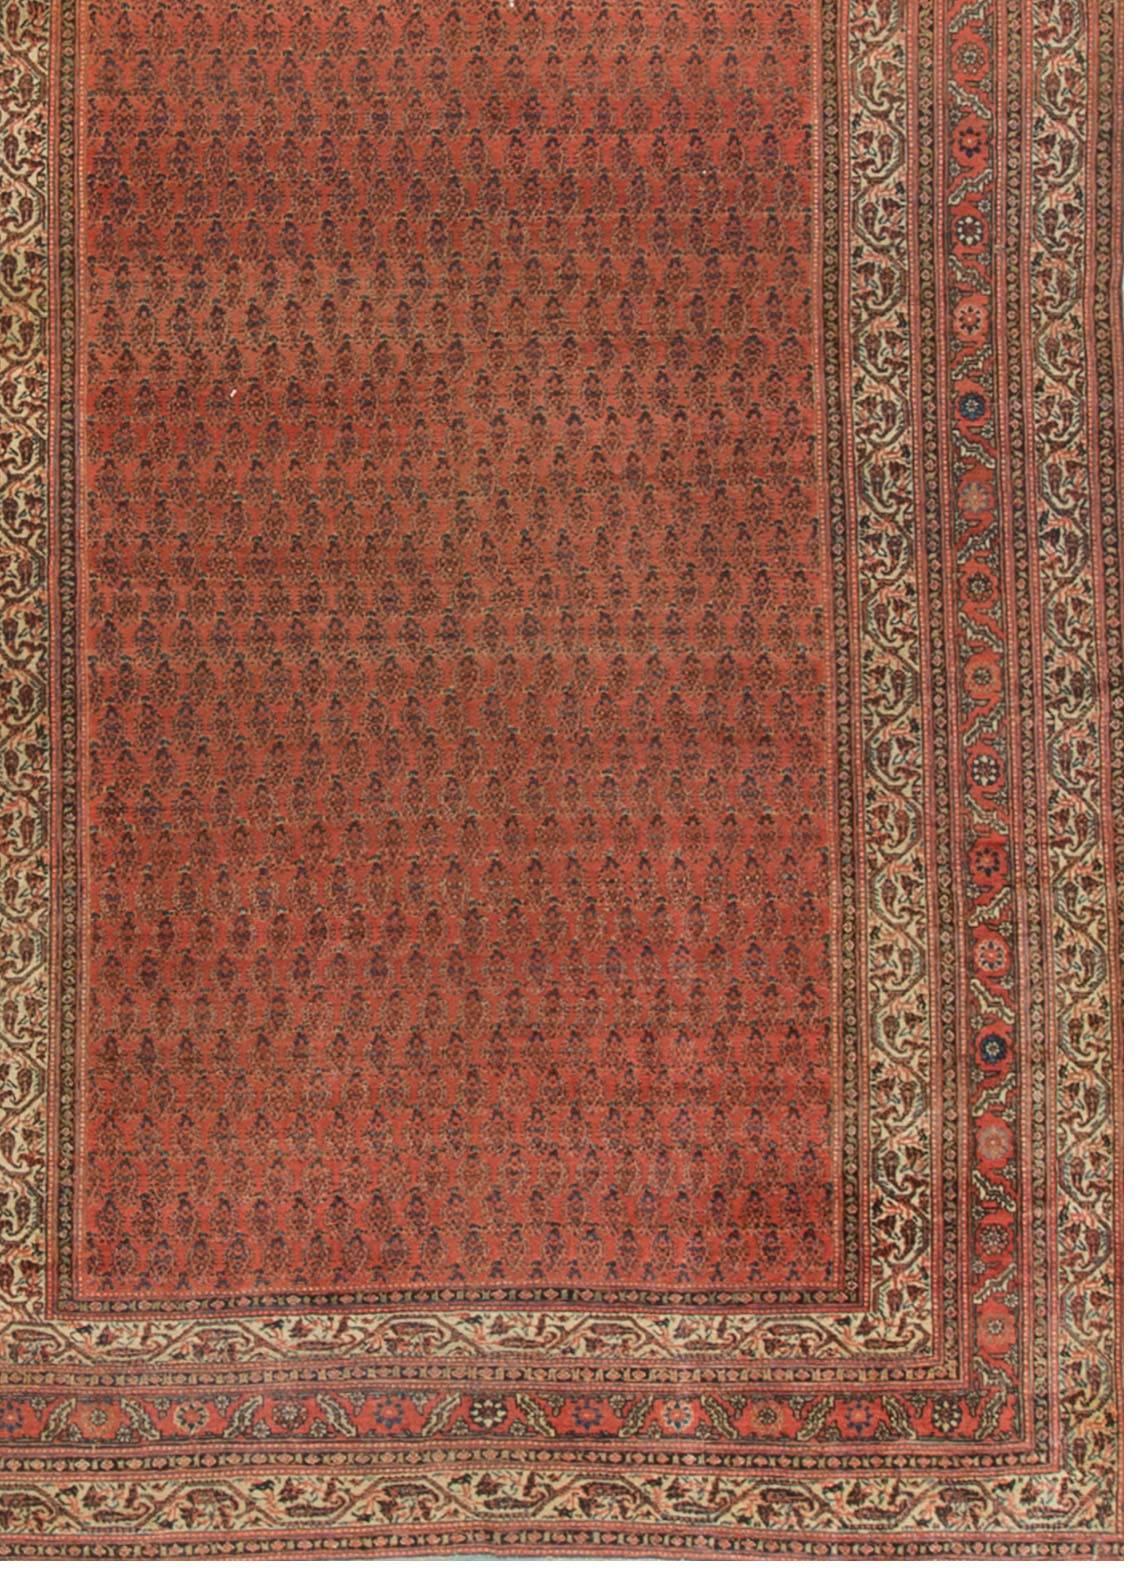 Hand-Knotted Vintage Persian Sereband circa 1930 Corridor Rug Carpet 7' x 16' For Sale